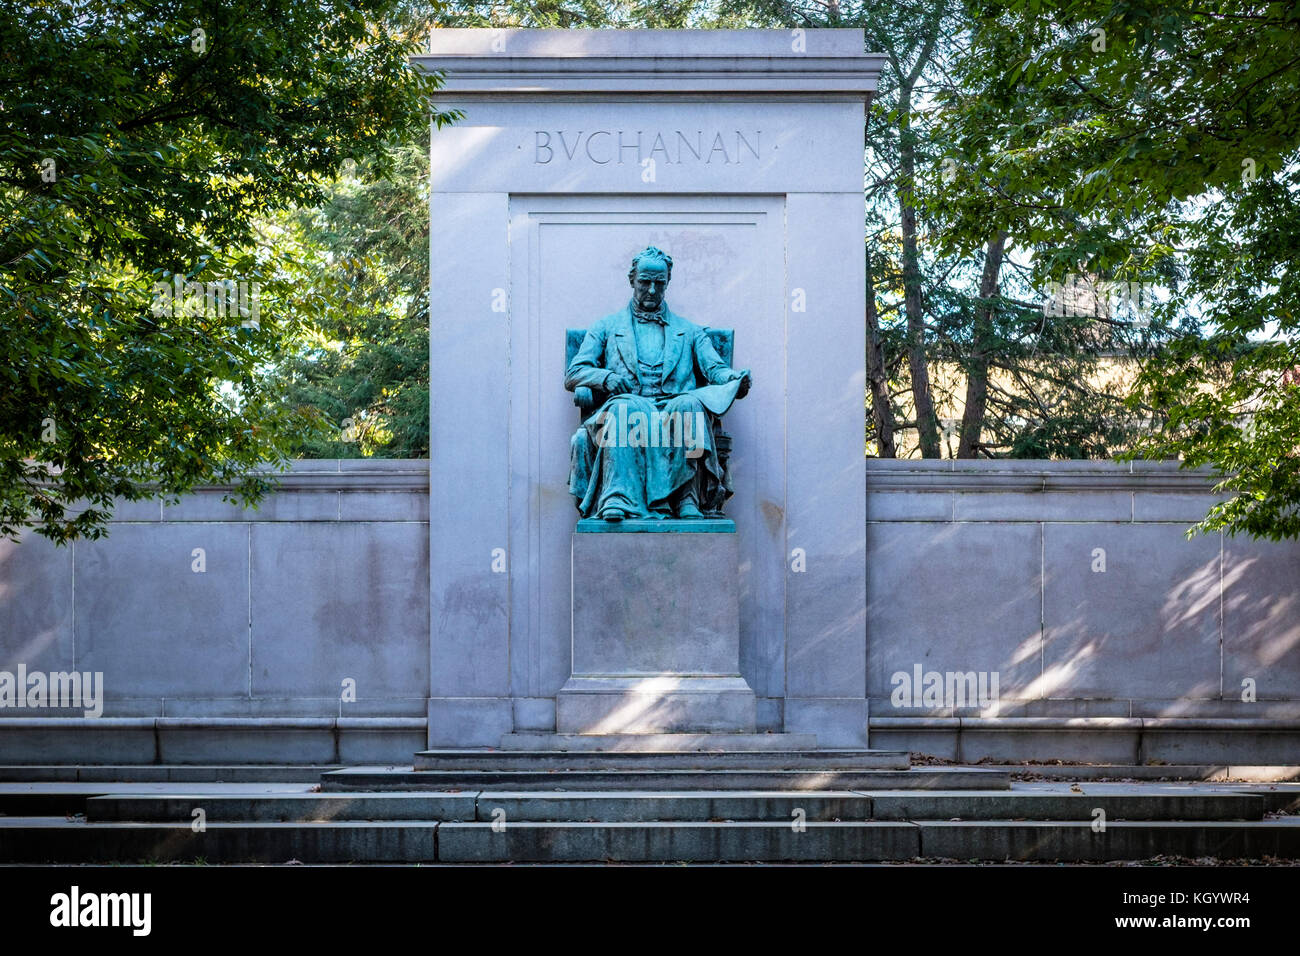 James Buchanan Memorial at Meridian Hill Park Northwest, Columbia Heights, Washington, D.C., by artist Hans Schuler, United States of America, USA. Stock Photo